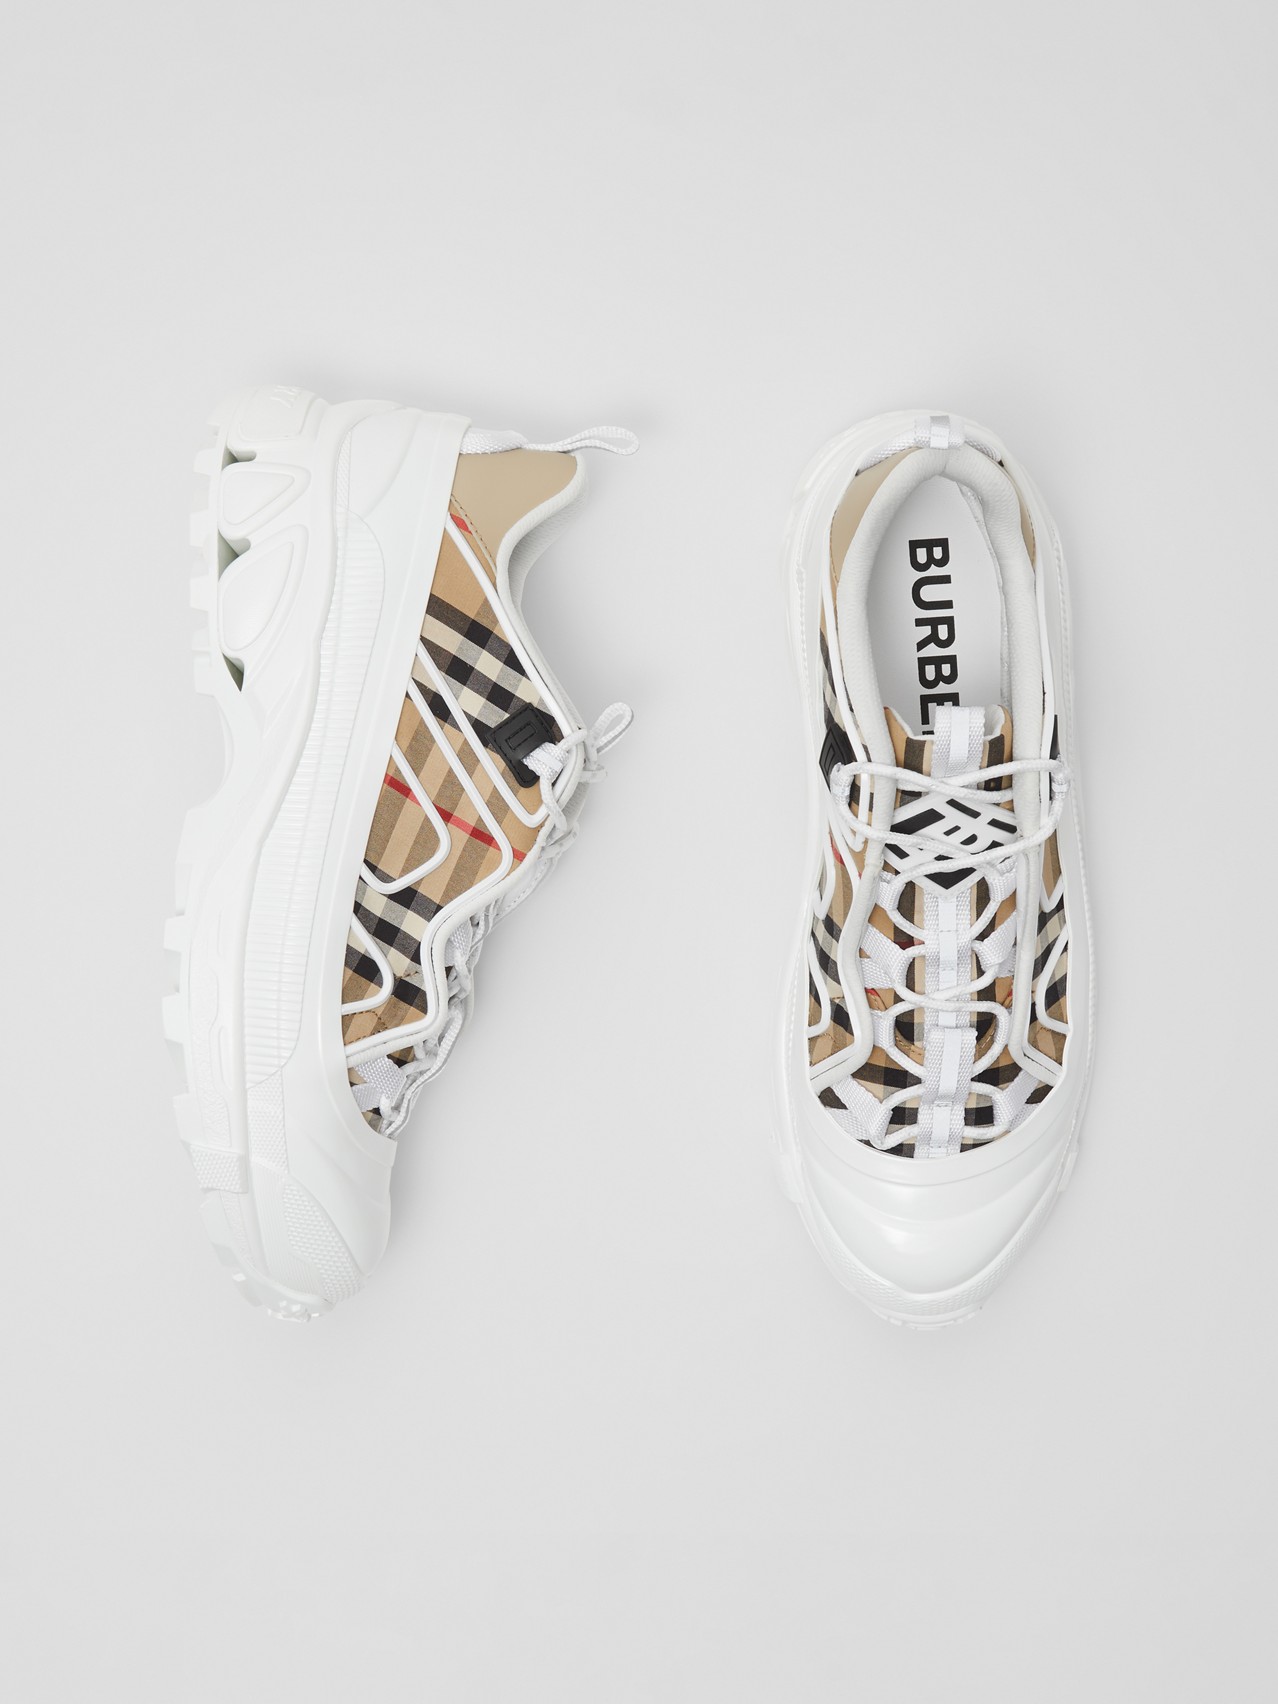 Vintage Check Cotton and Leather Arthur Sneakers by Burberry, available on burberry.com for $690 Gigi Hadid Shoes SIMILAR PRODUCT